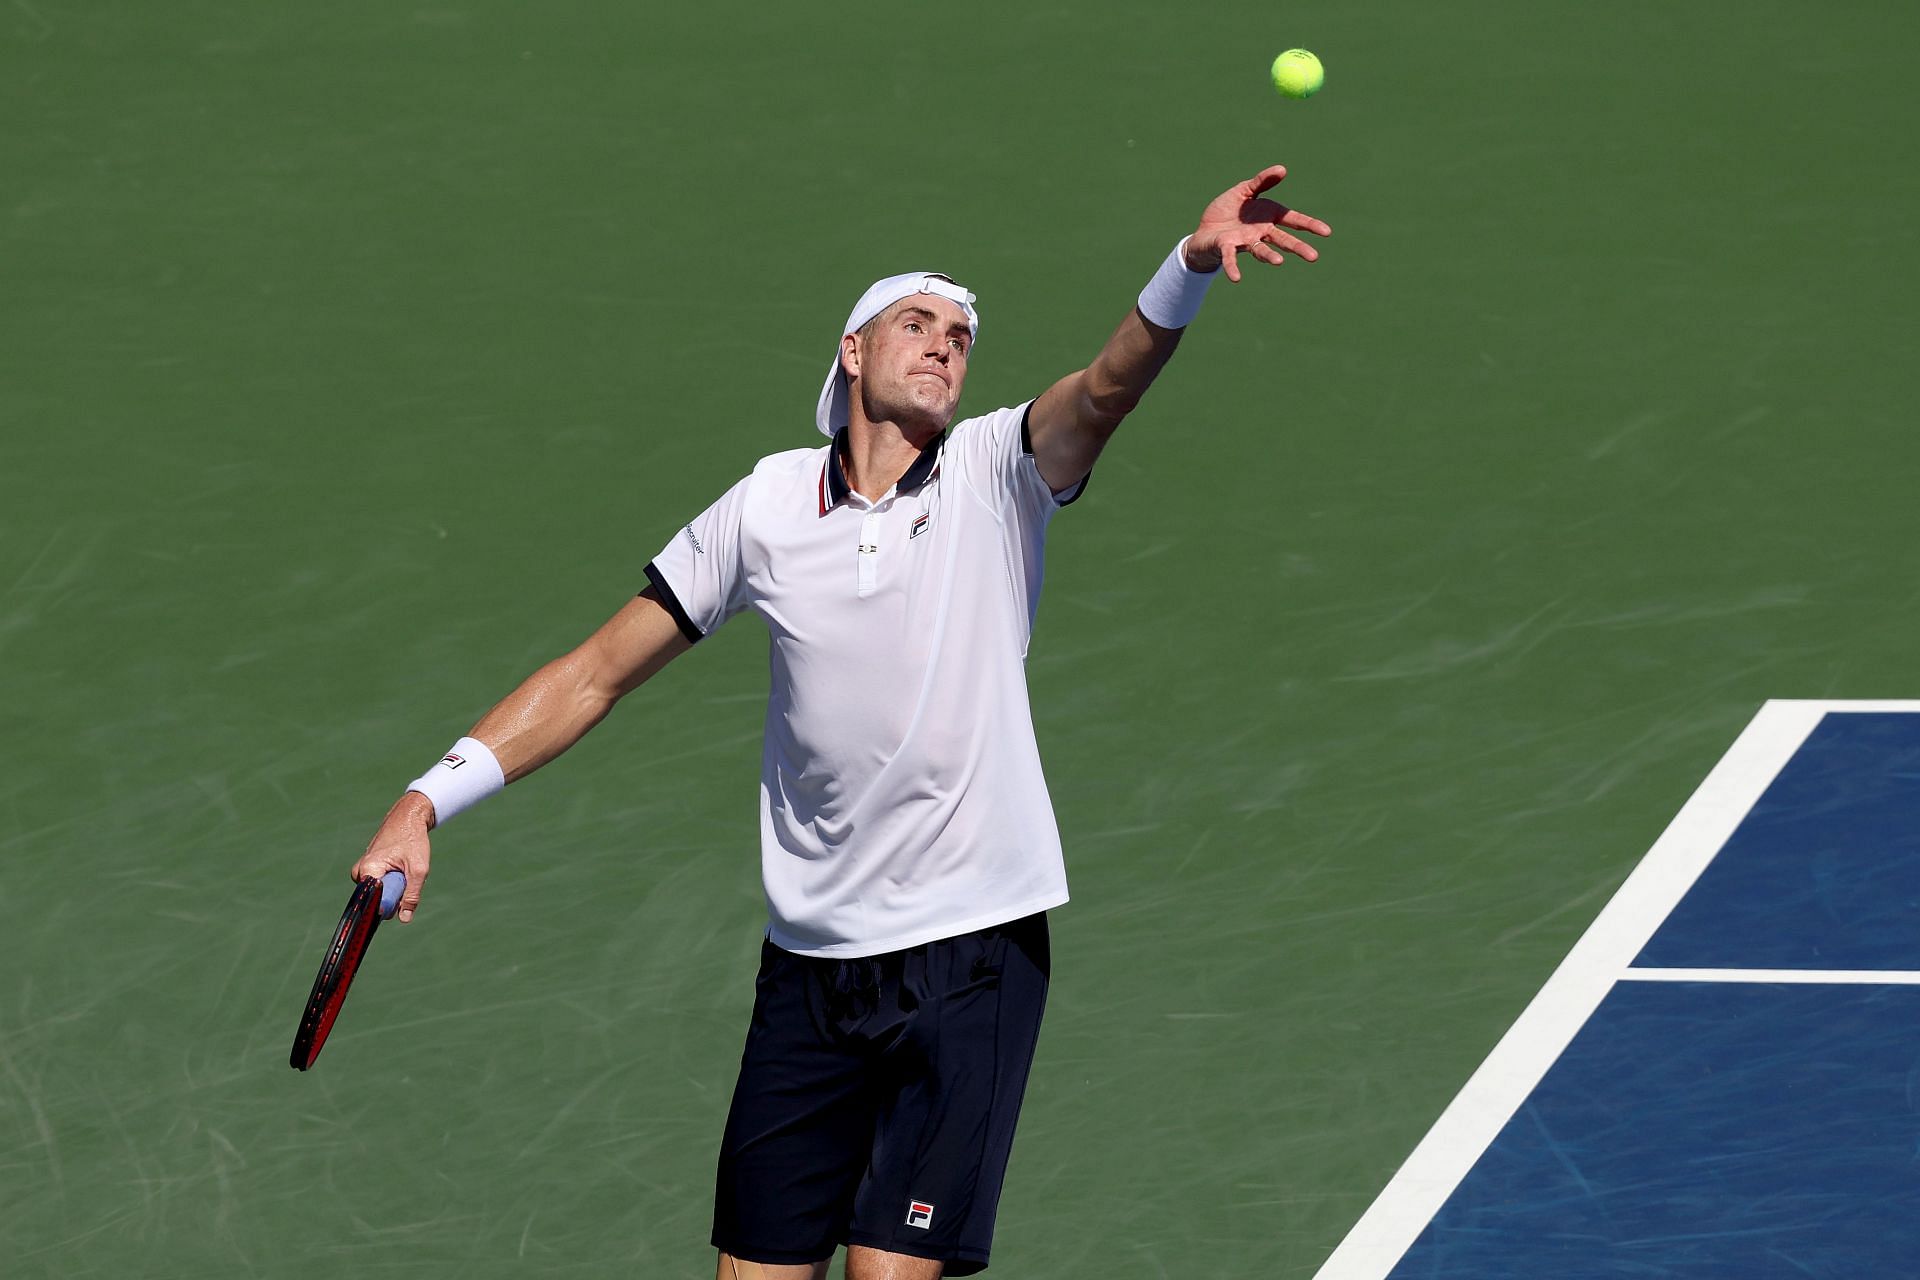 Isner serves at the 2022 US Open - Day 2